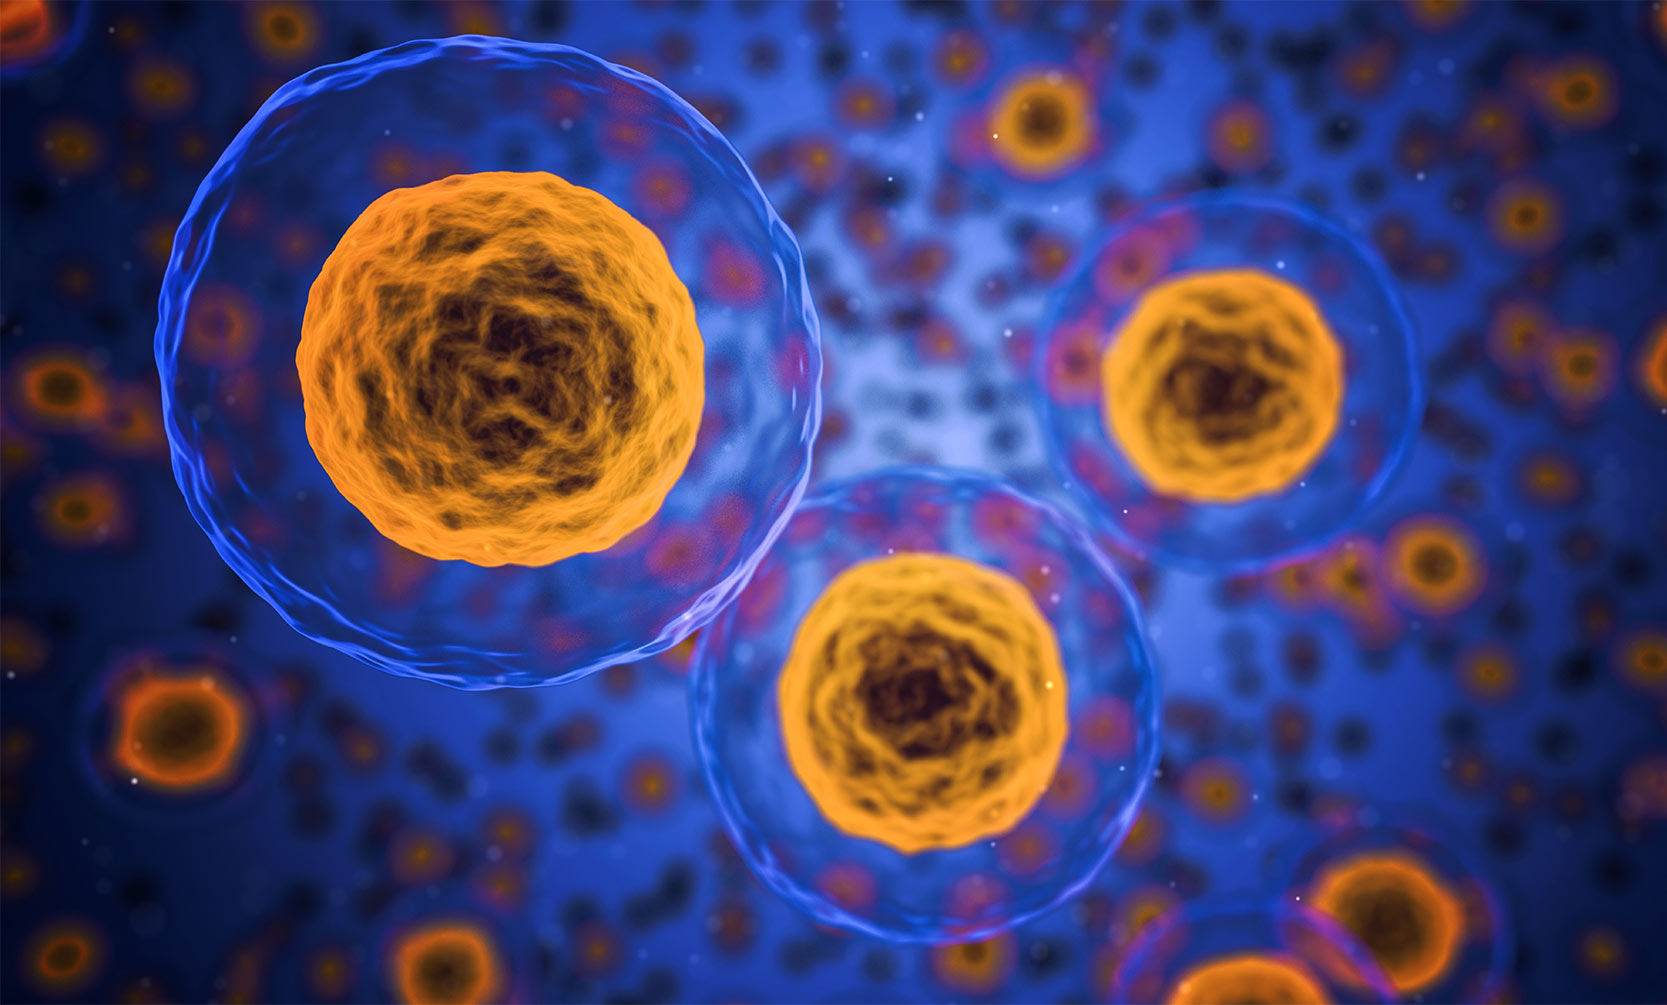 Artists rendering of cells on a blue background.